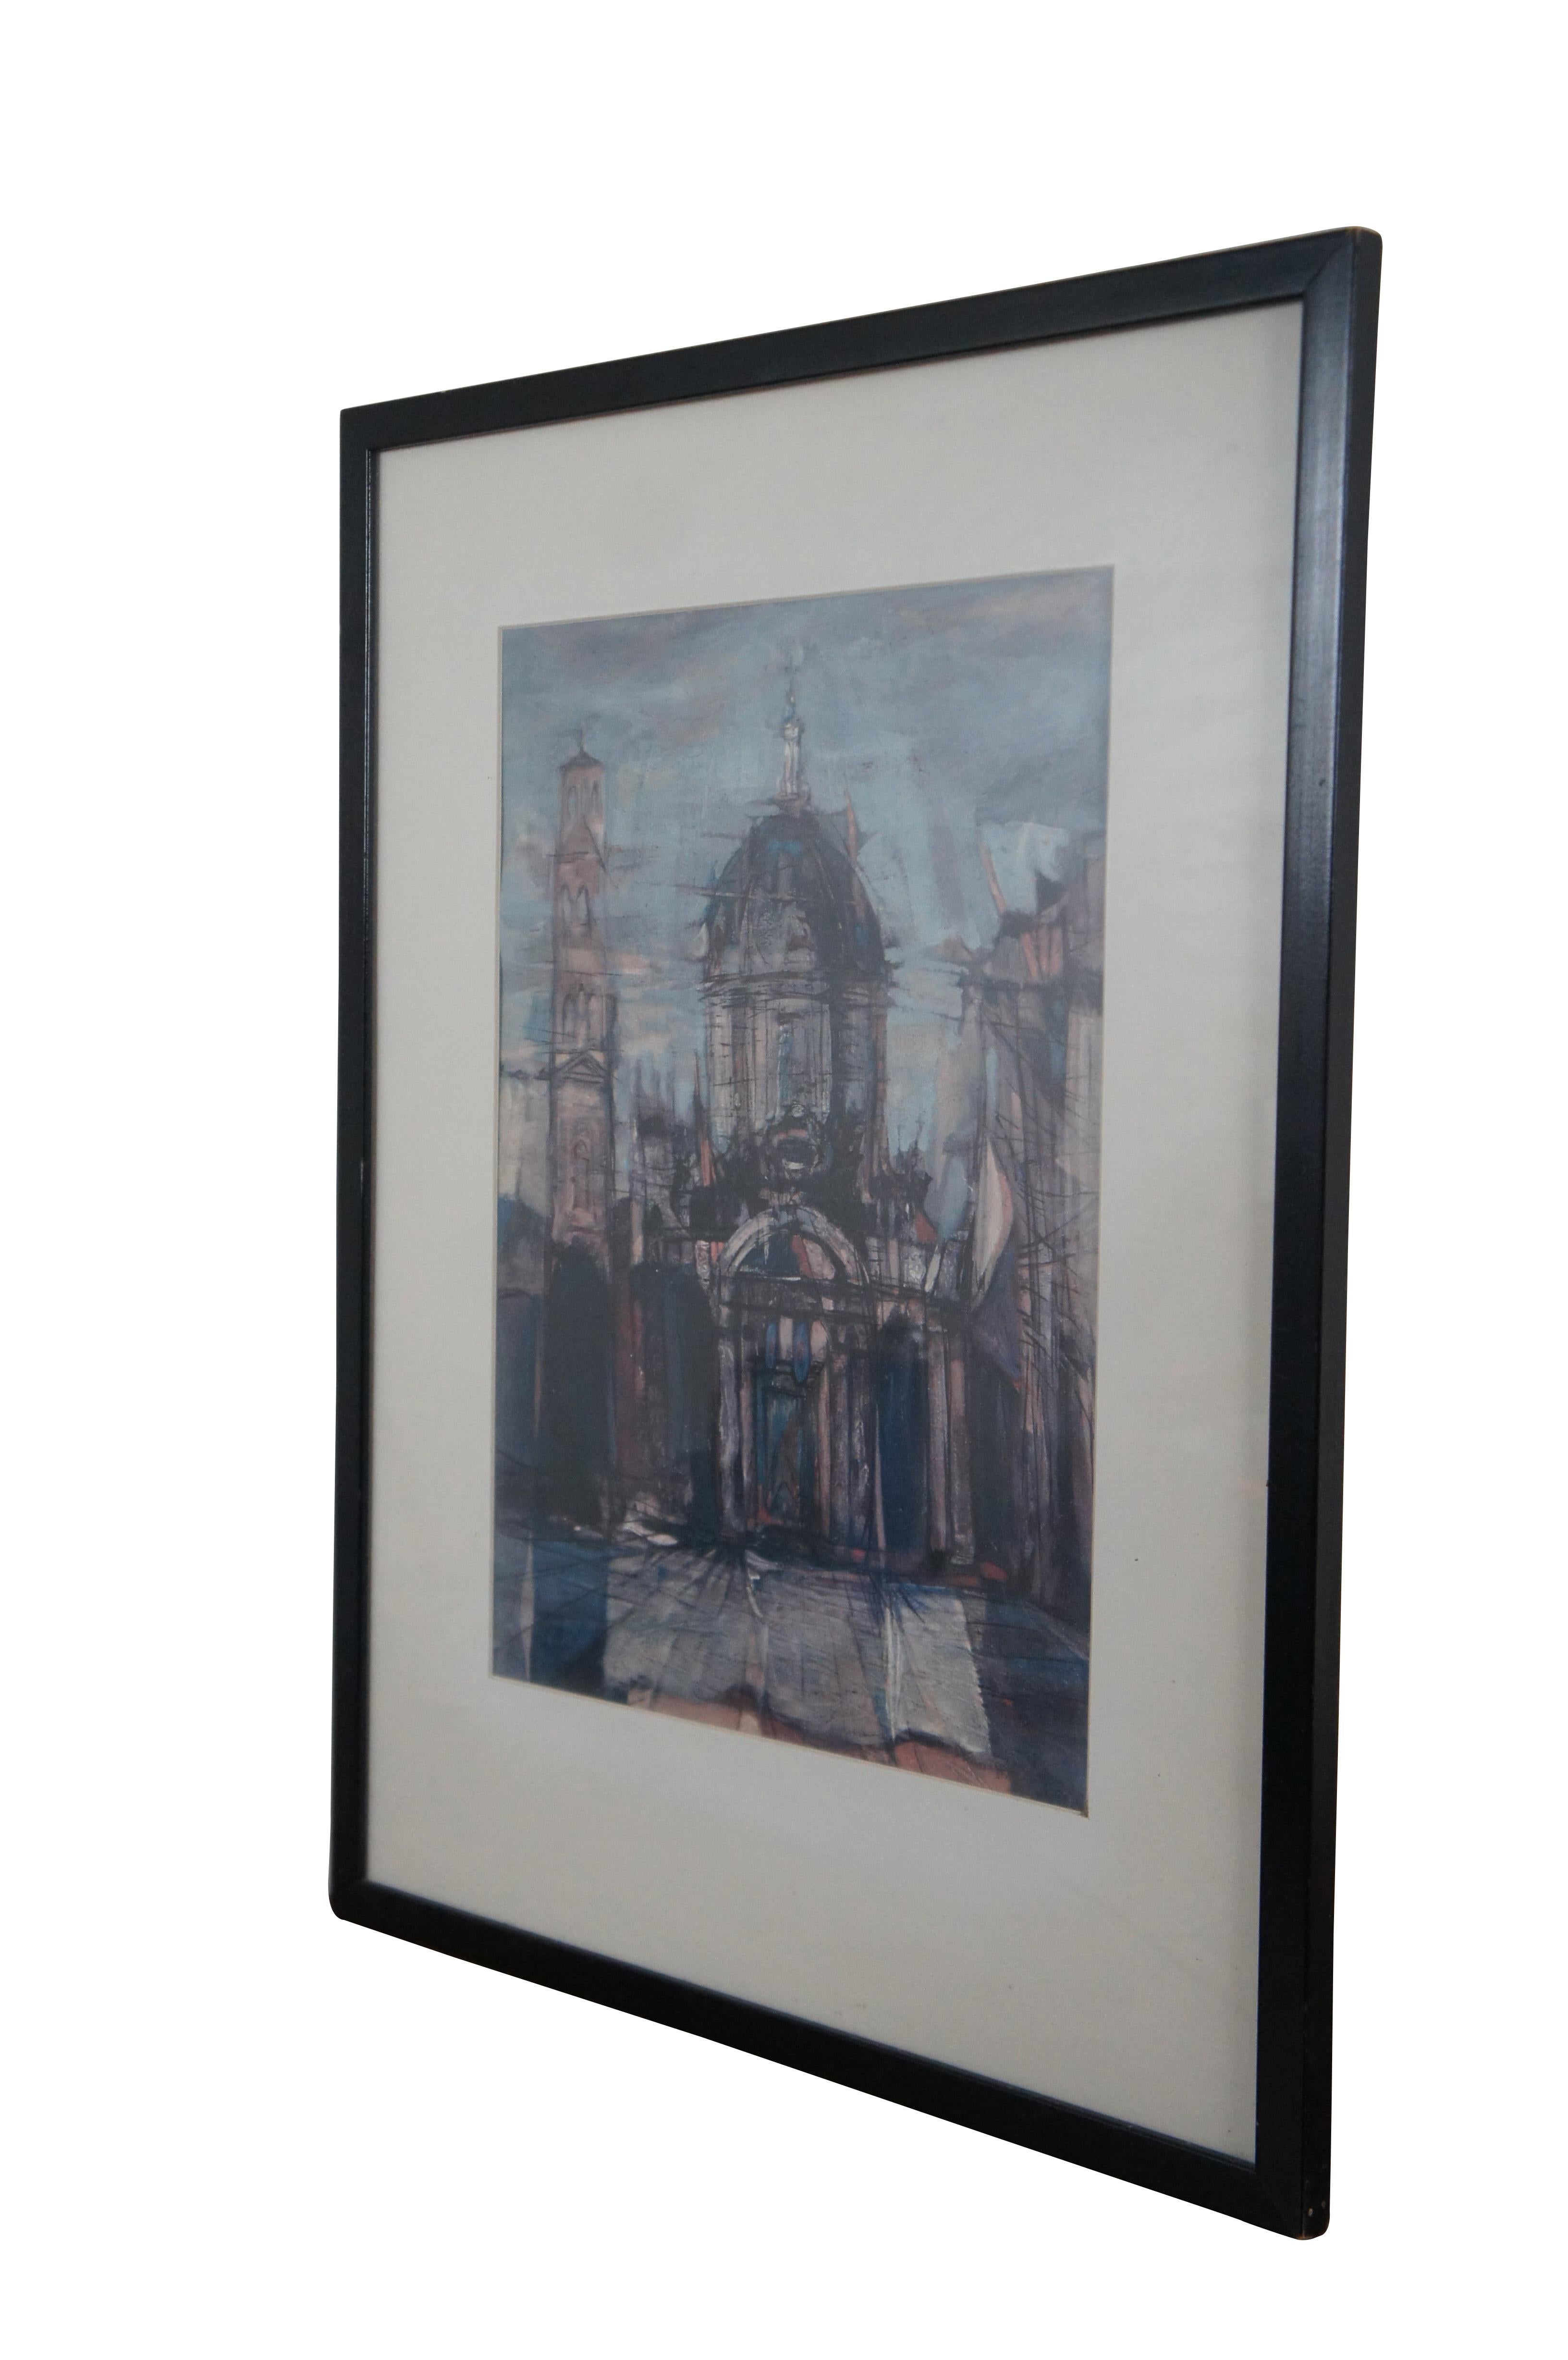 Vintage impressionist / expressionist style digital print depicting the entrance of a domed church building with a bell tower at the left. Pencil signed in lower right corner. Black painted wood frame; white mat.

Dimensions:
19